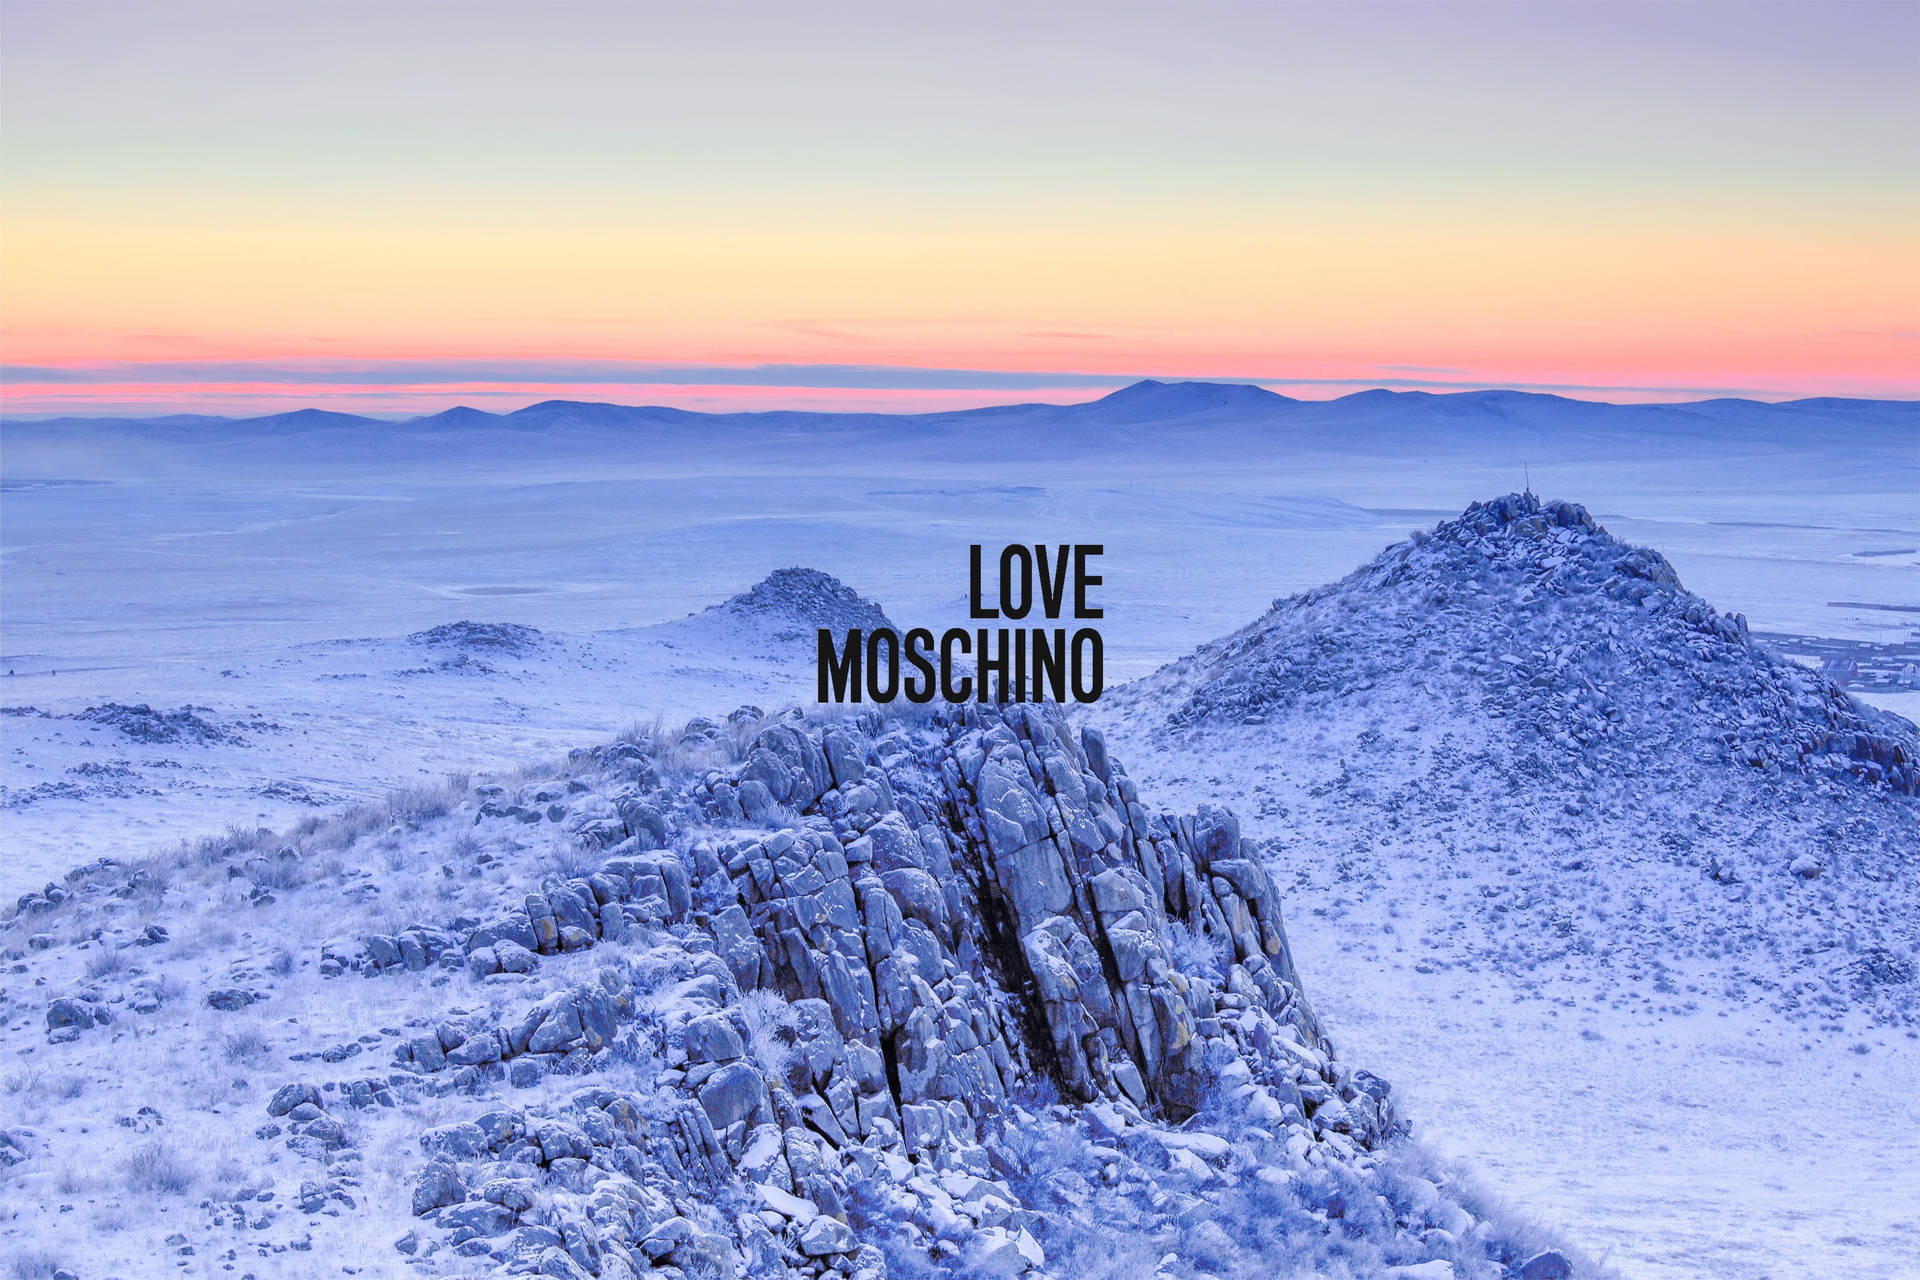 Love Moschino Snowy Mountains Wallpaper